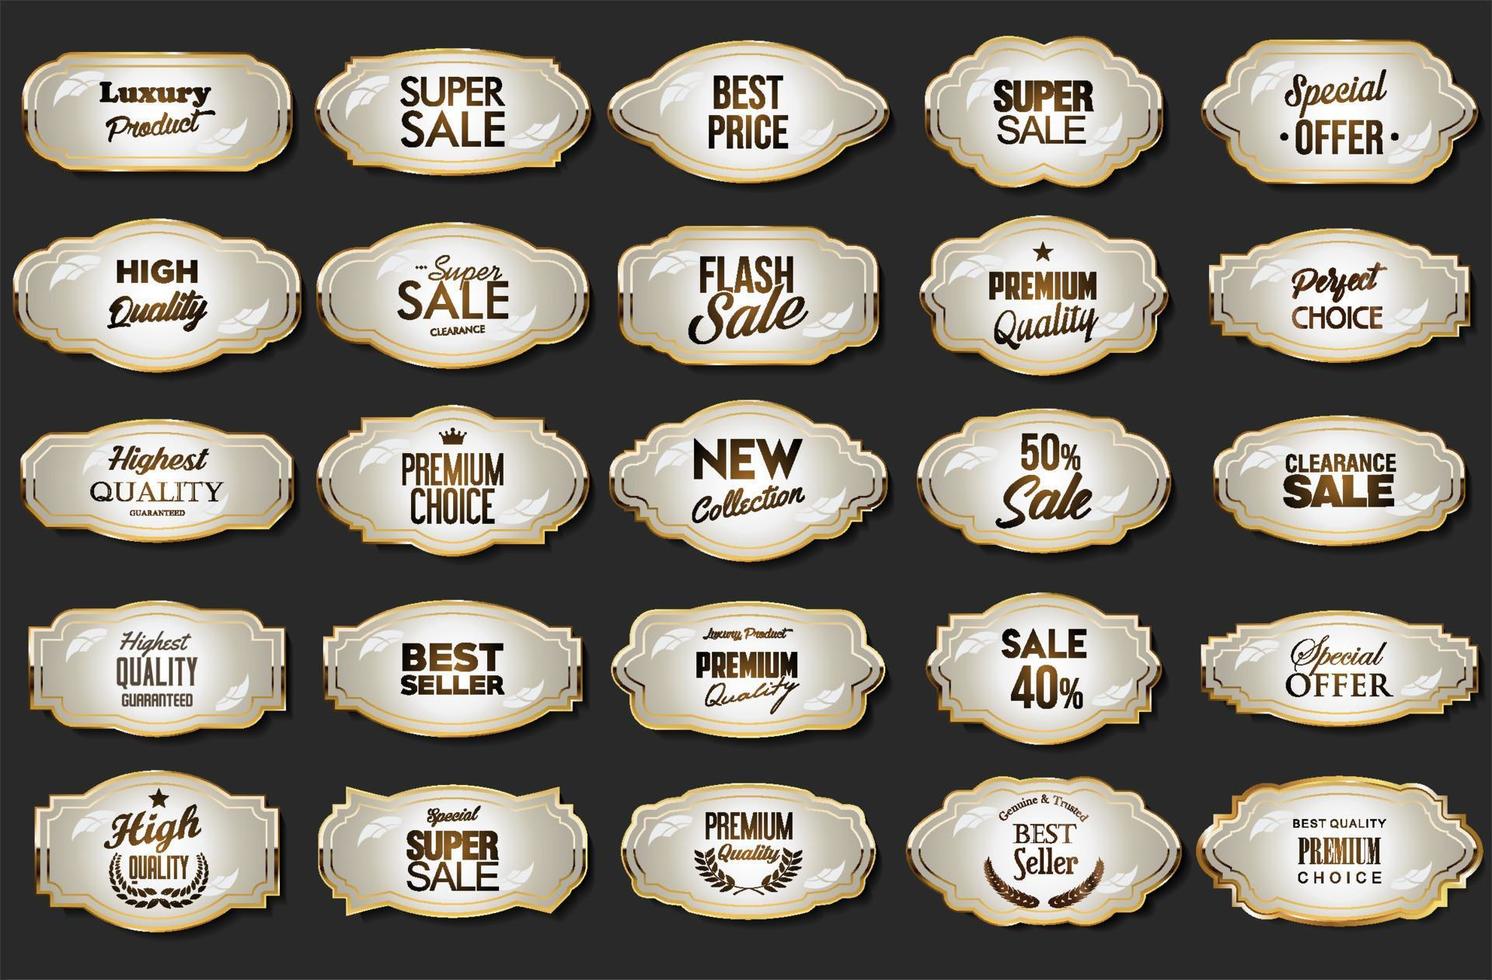 Decorative vintage gold and white frame and retro badge old ornate labels collection vector